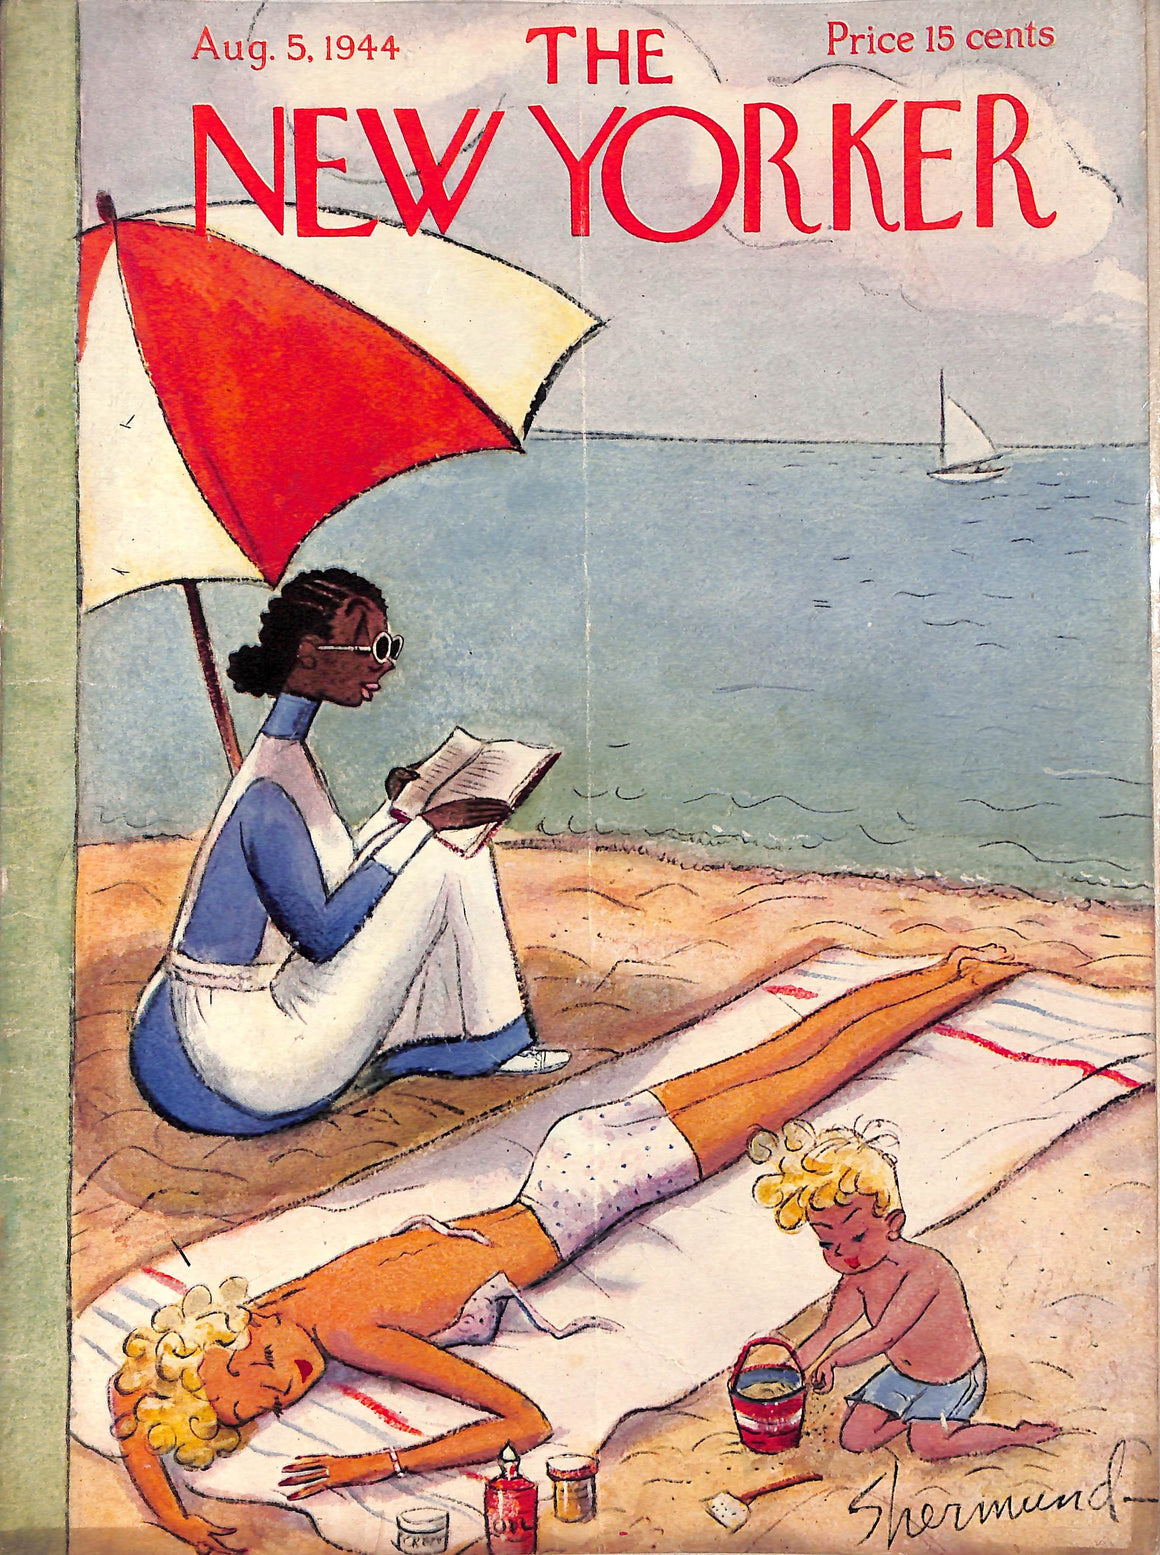 "The New Yorker" Aug. 5, 1944 (SOLD)